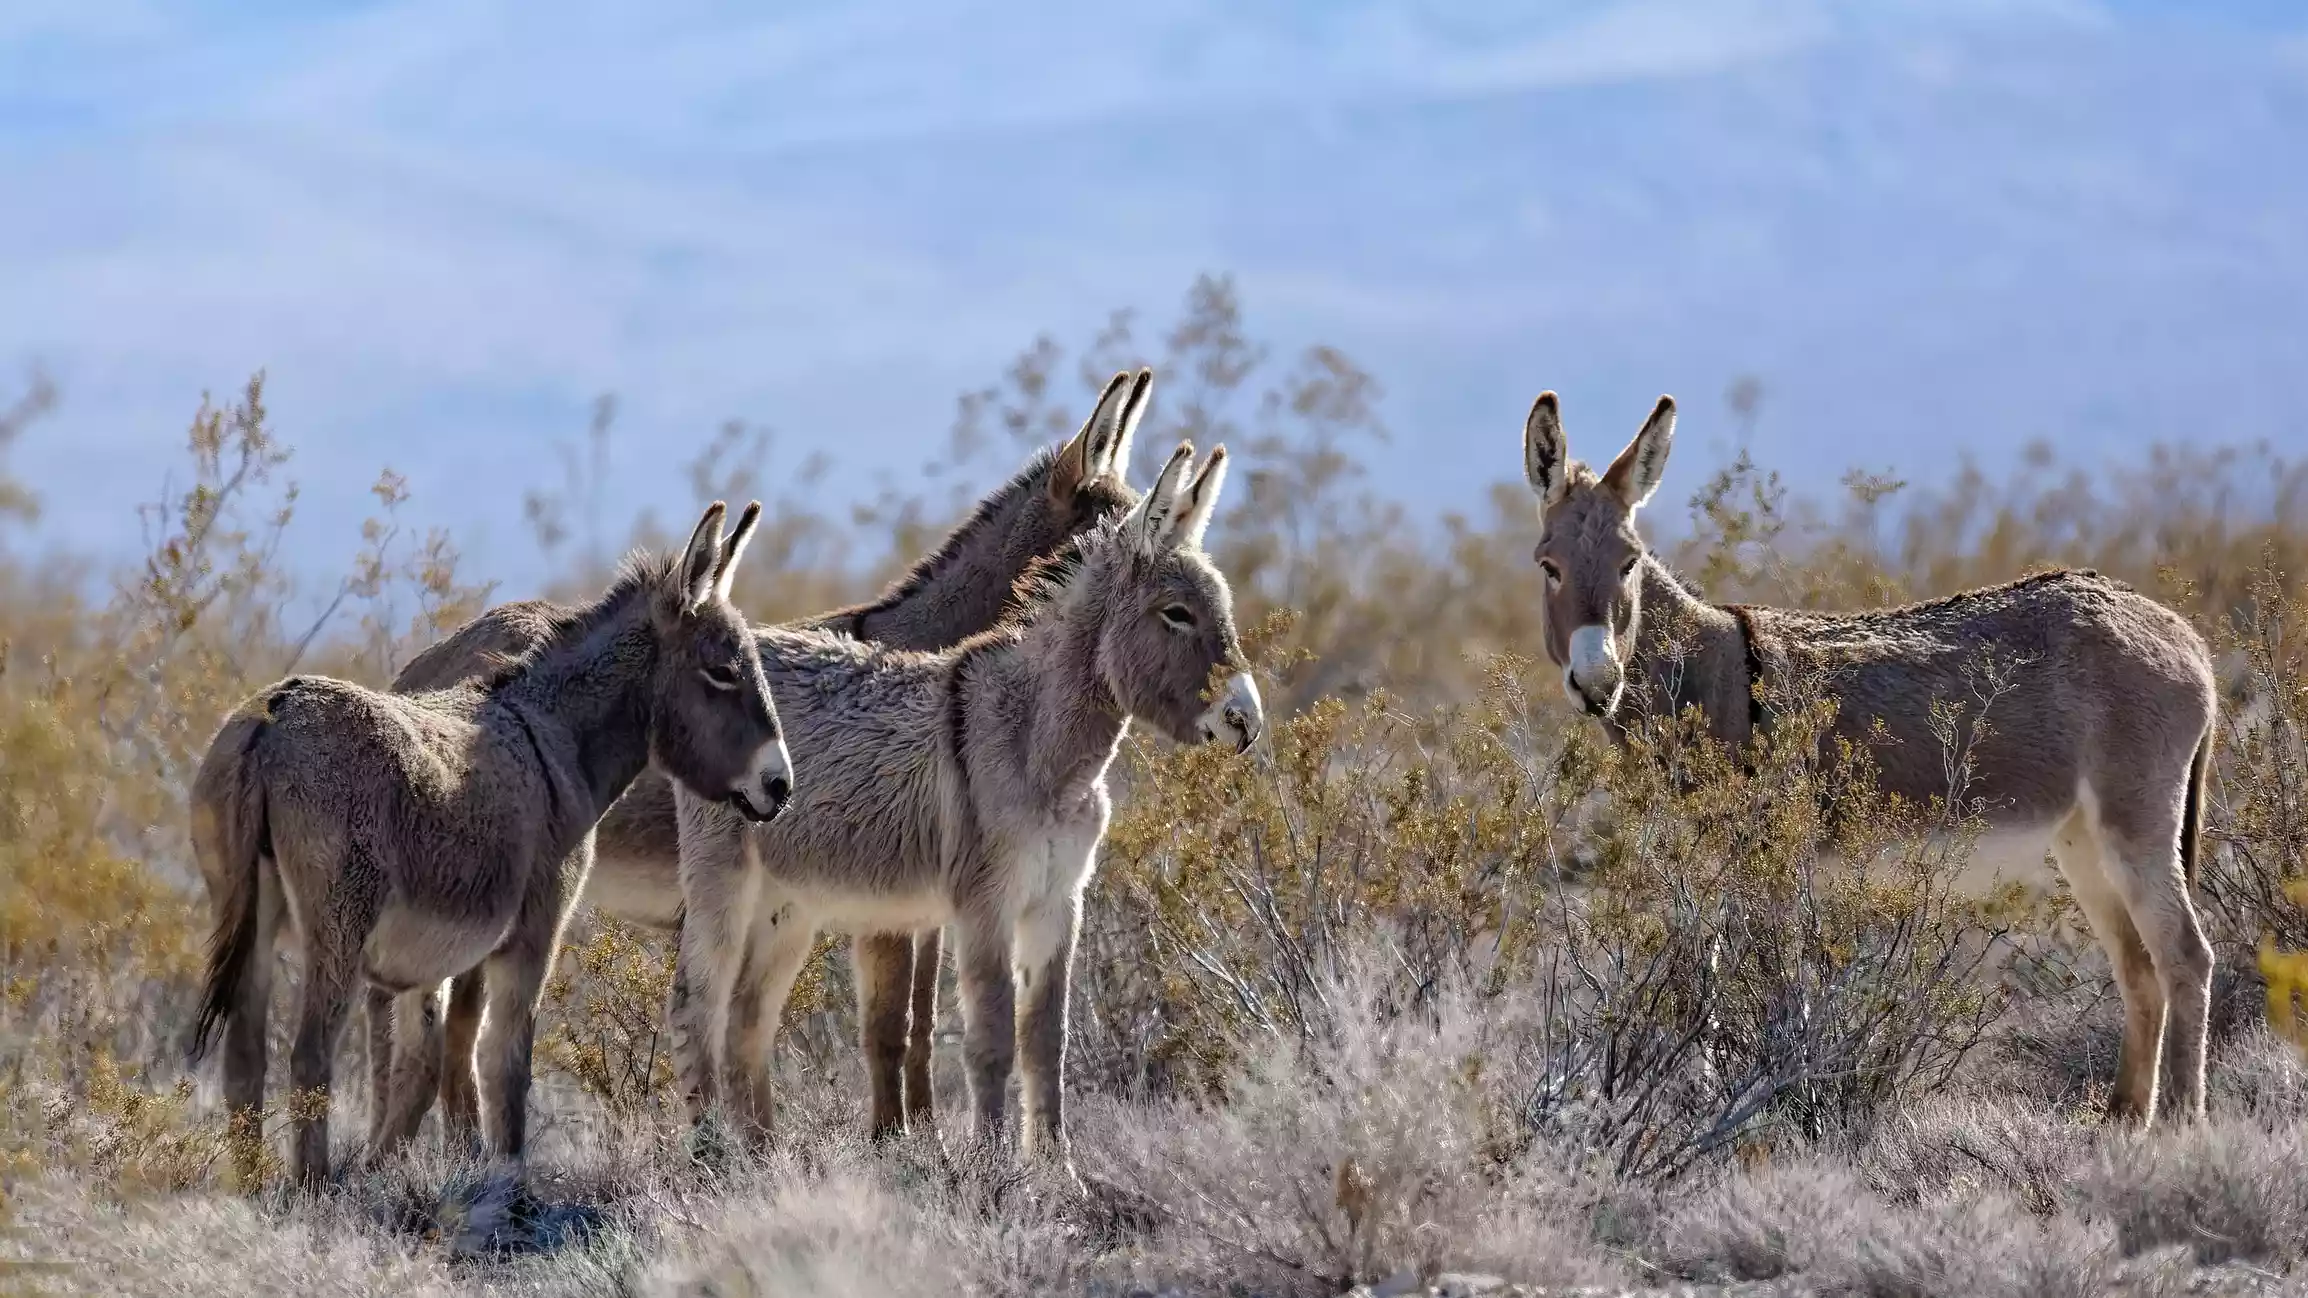 group of four burros stand near dry bushes